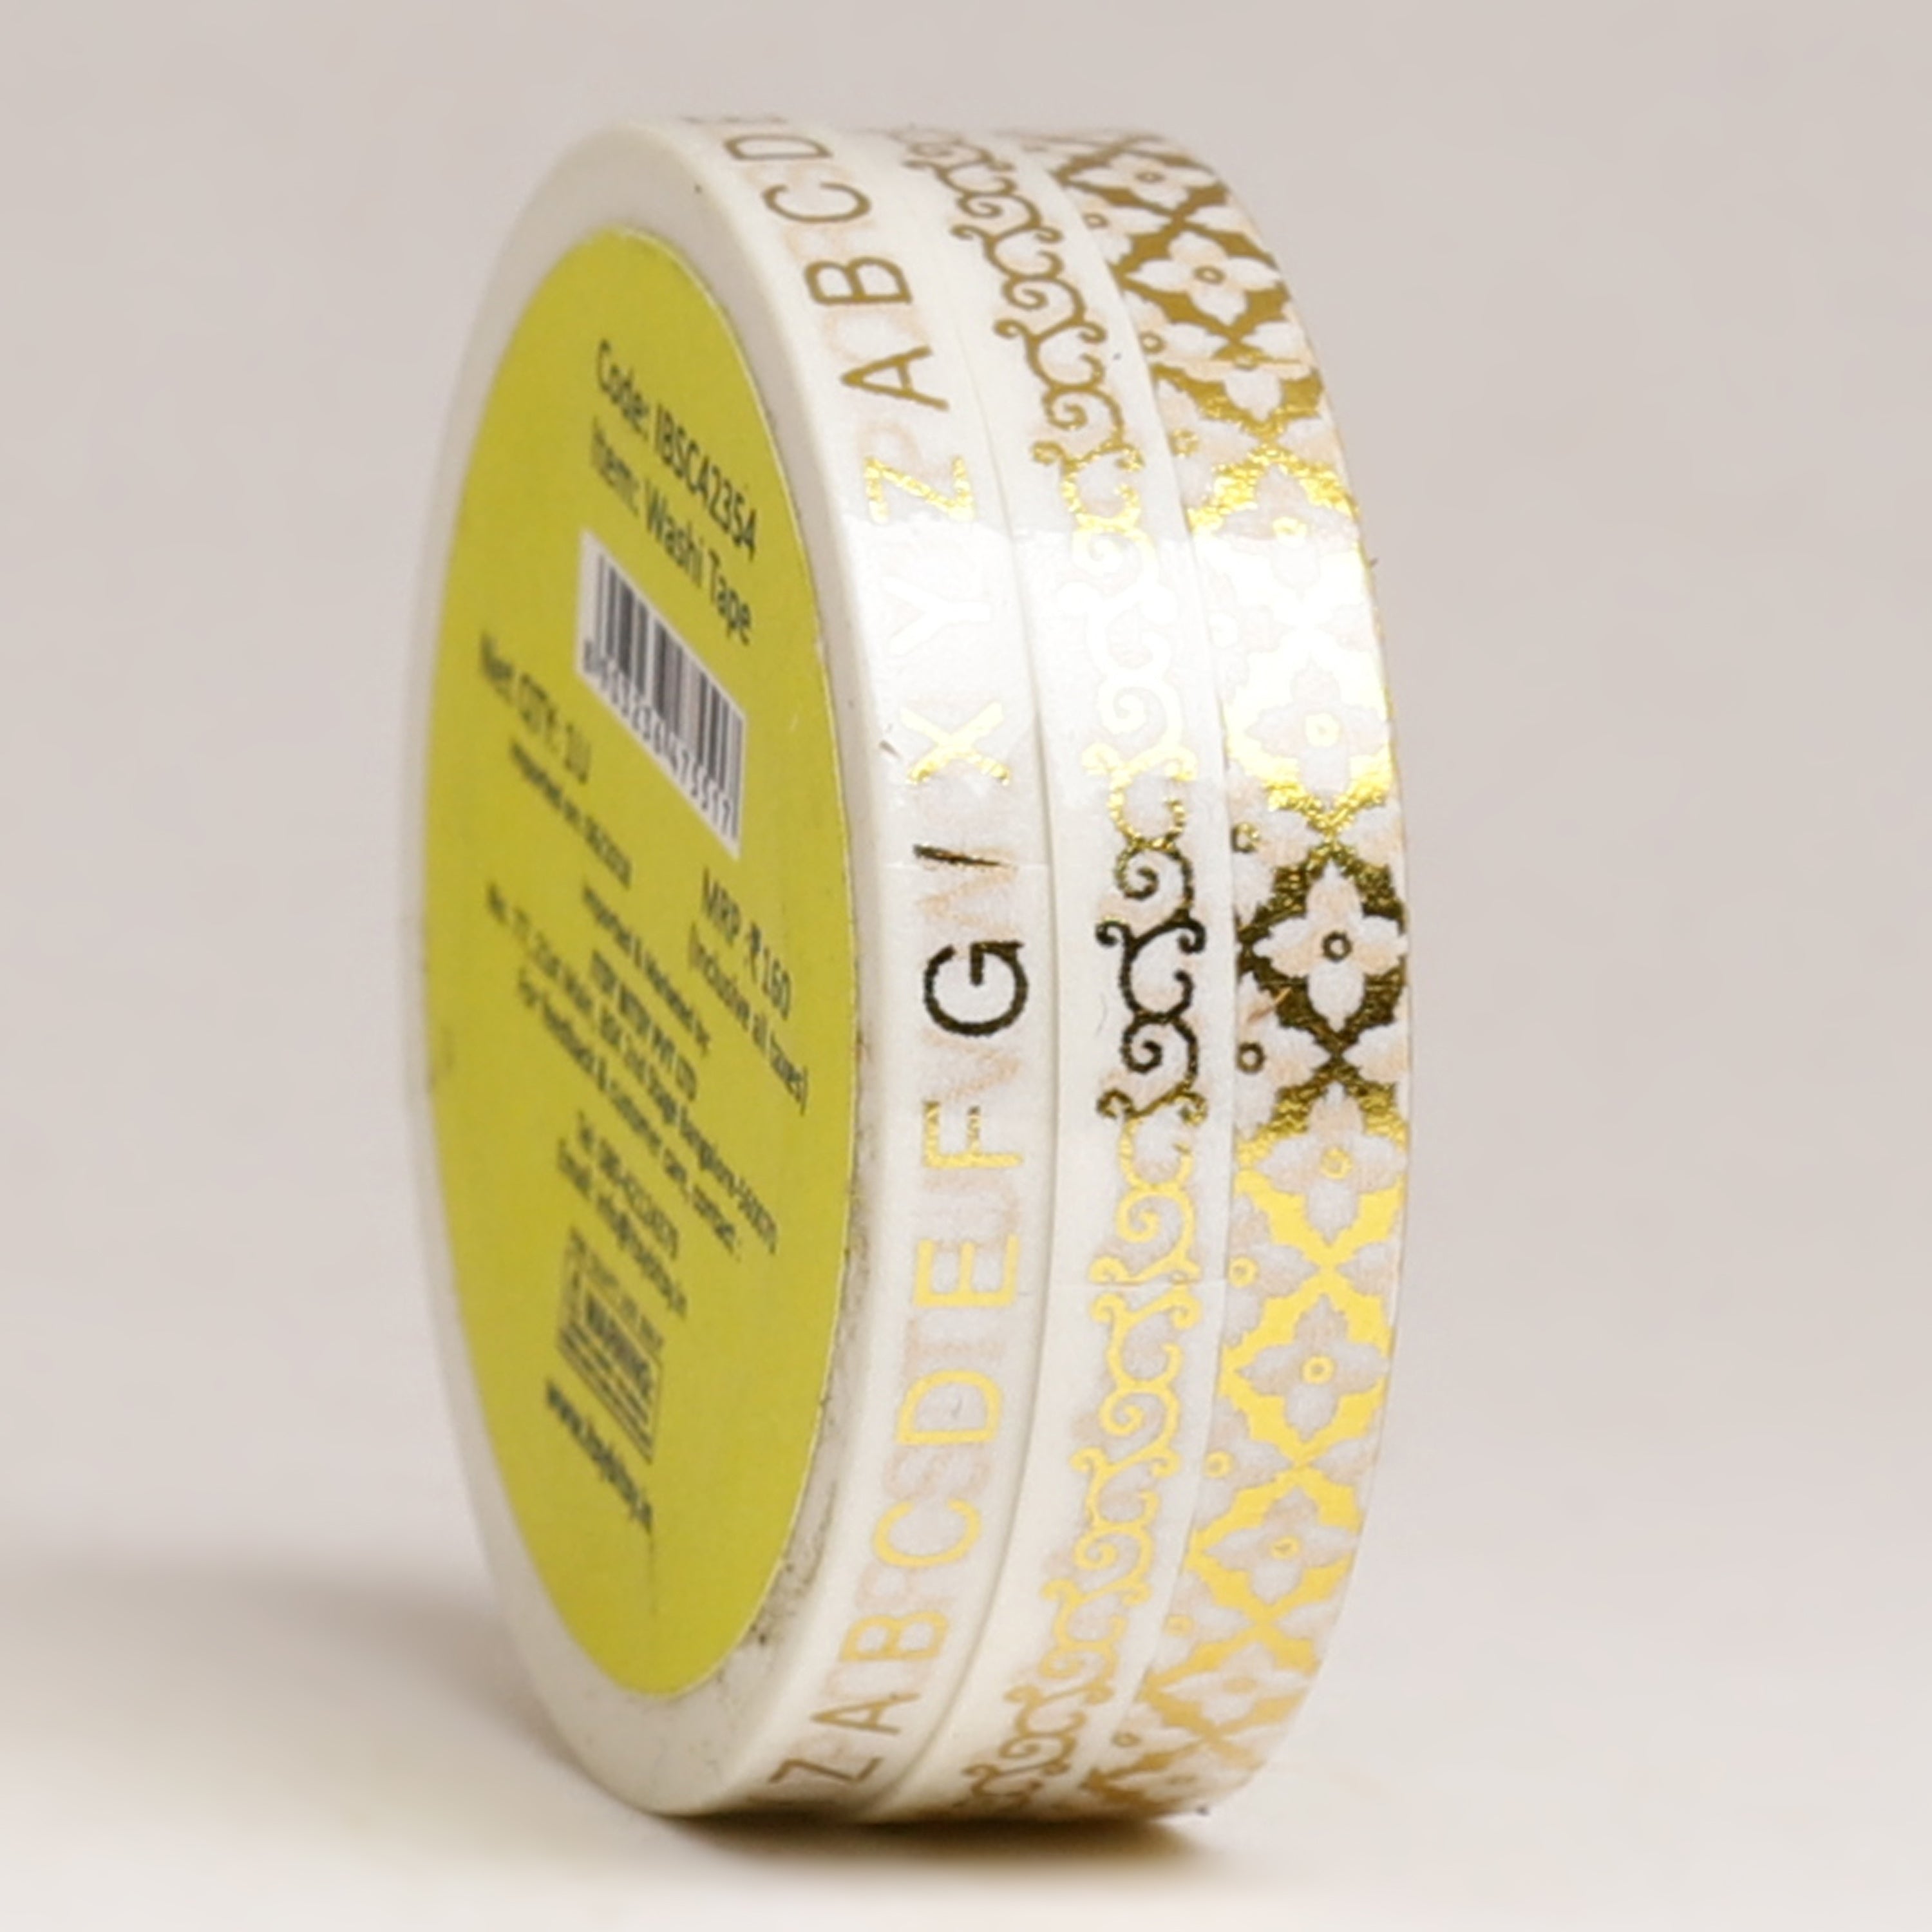 Washi Tape - Alphabets and Patterns, 5mmx10m, 1pc